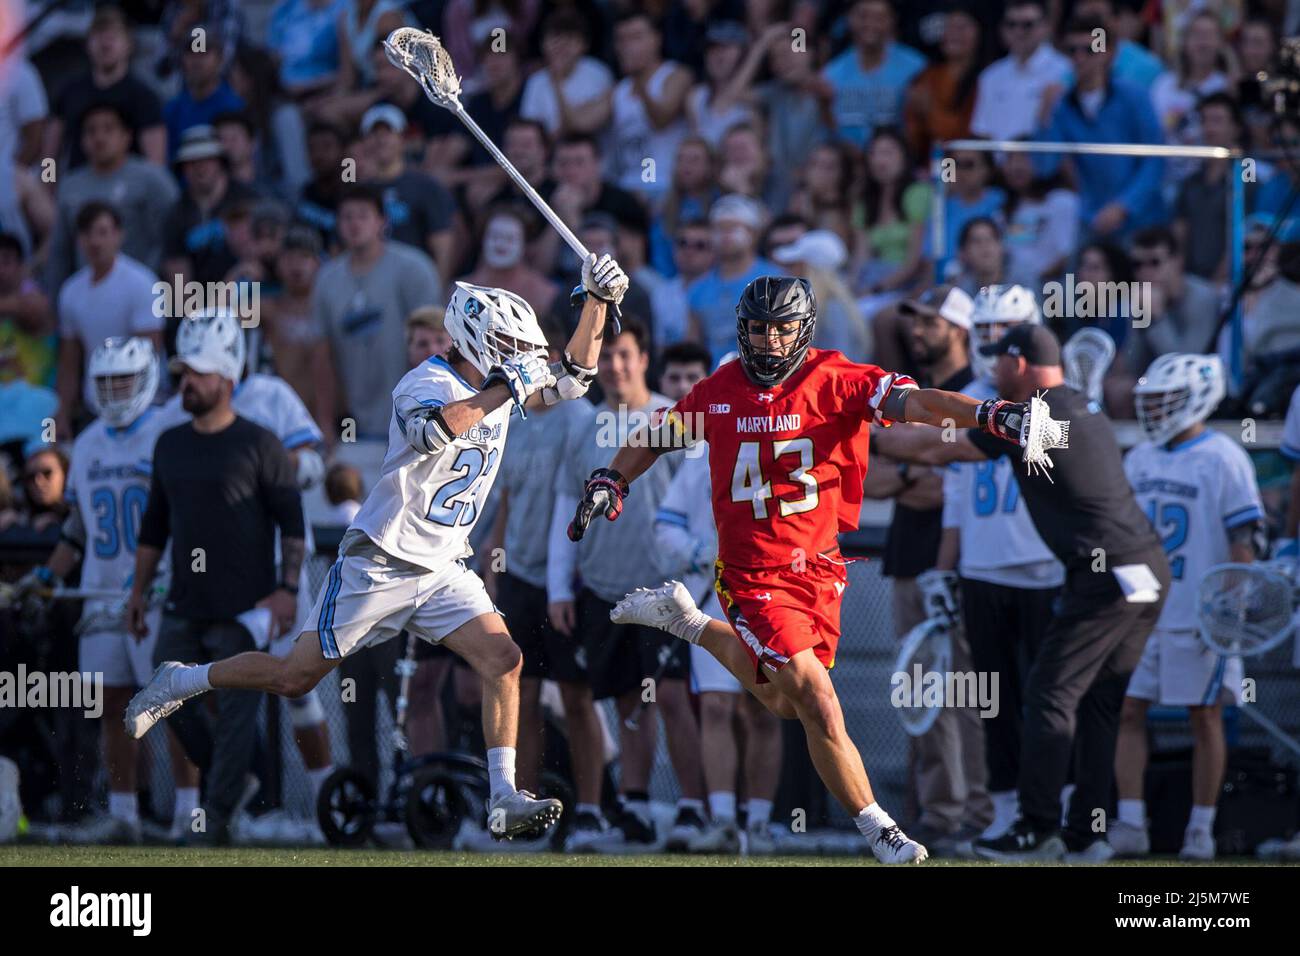 April 23, 2022: Maryland defender Brett Makar (43) brings the ball upfield with Johns Hopkins midfielder Jacob Angelus (23) on defense during the ncaa men's lacrosse regular season finale between the Maryland Terrapins and the Johns Hopkins Blue Jays at Homewood Field in Baltimore, Maryland Photographer: Cory Royster Stock Photo